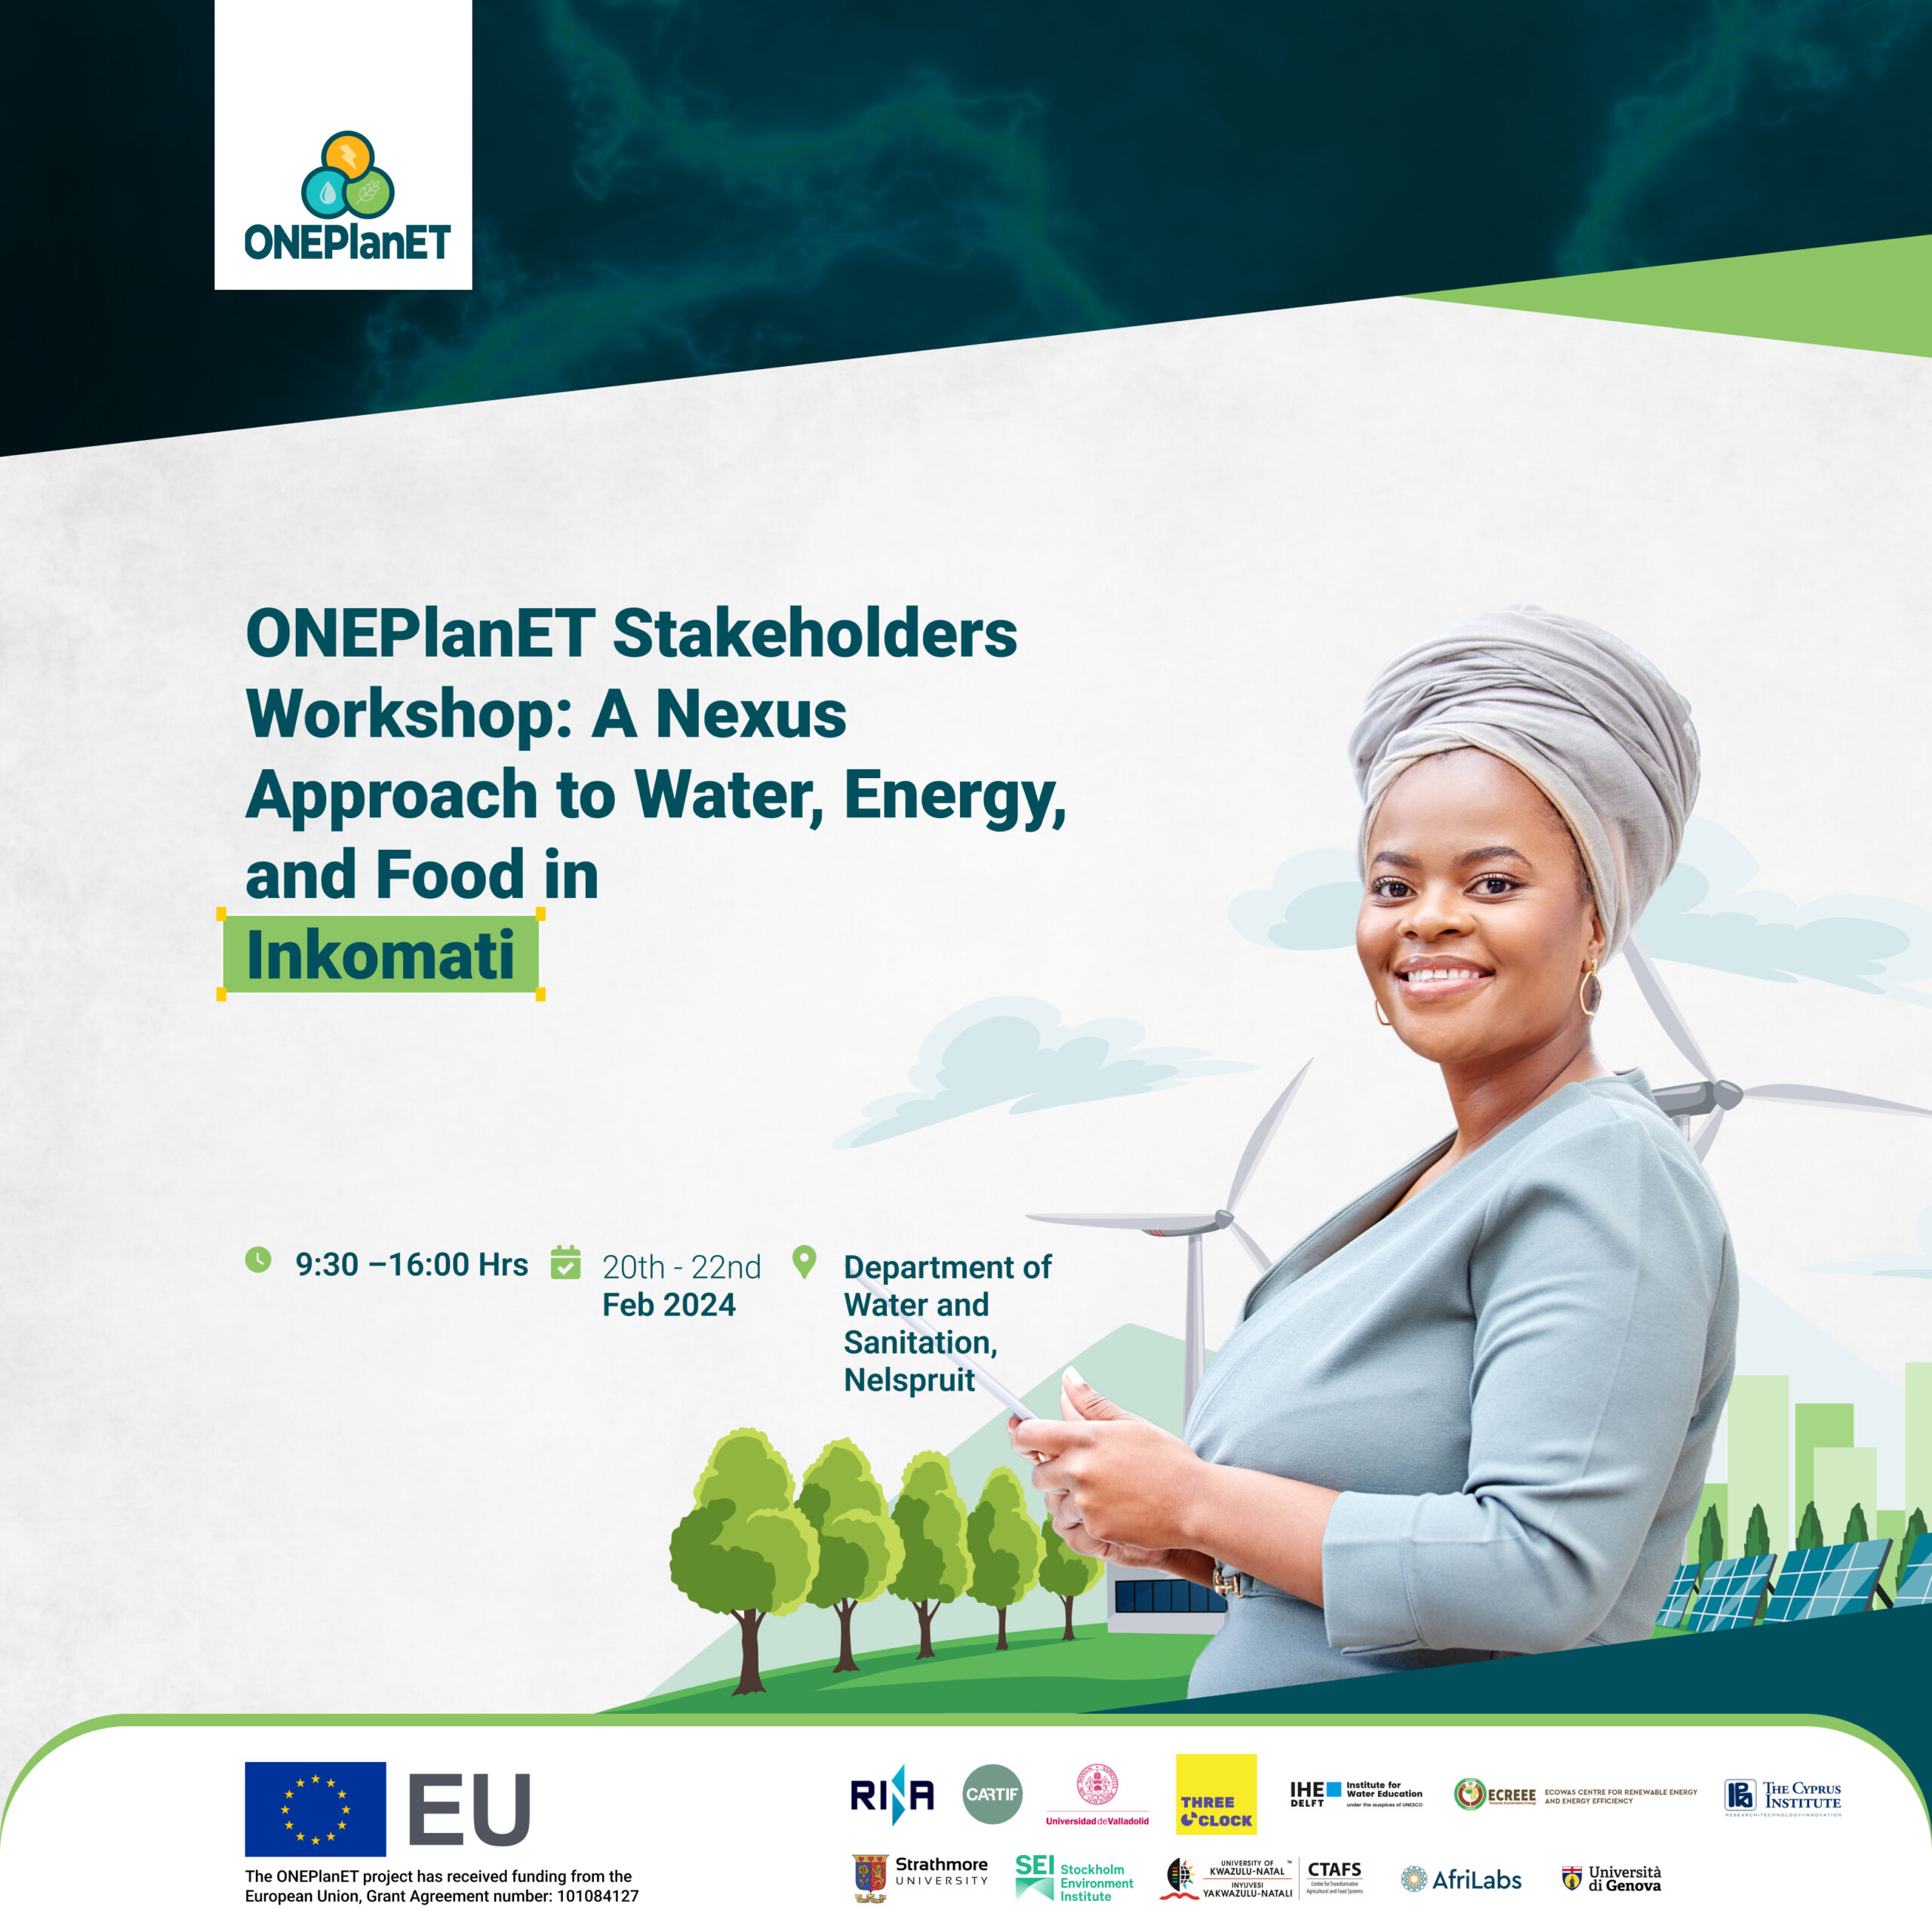 ONEPlanET will host a Stakeholders Workshop